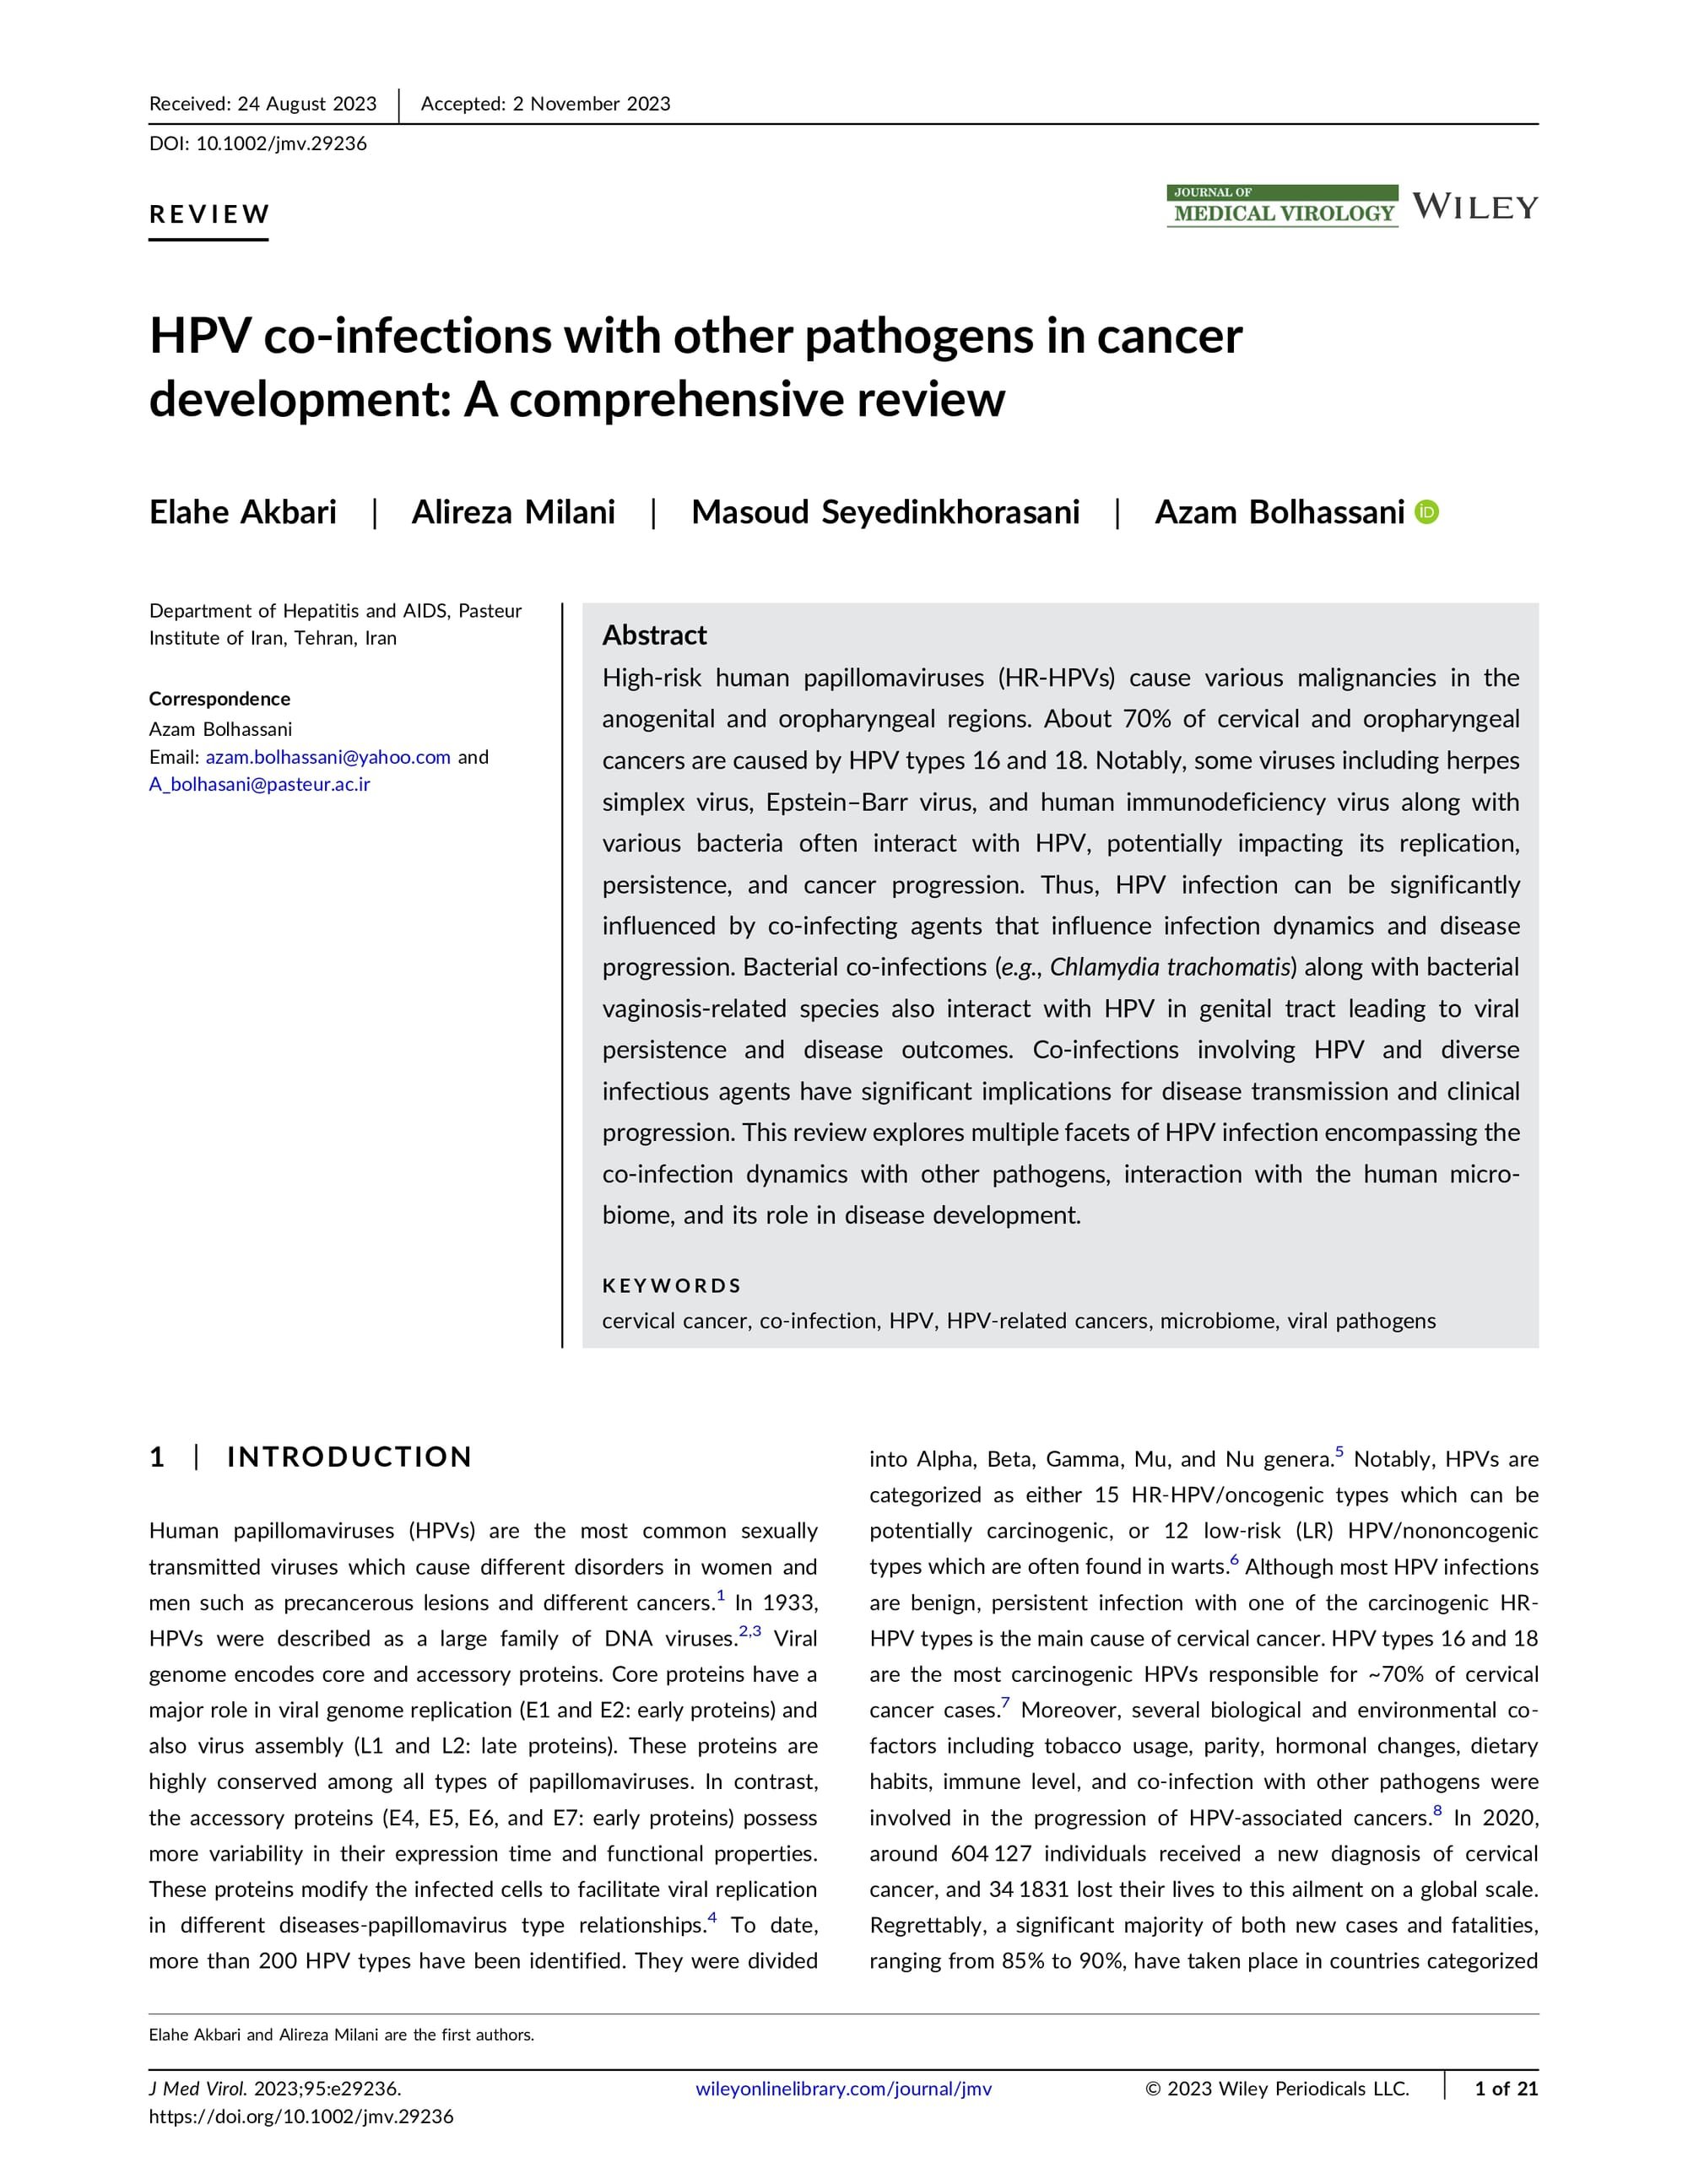 HPV co-infections with other pathogens in cancer development: A comprehensive review.